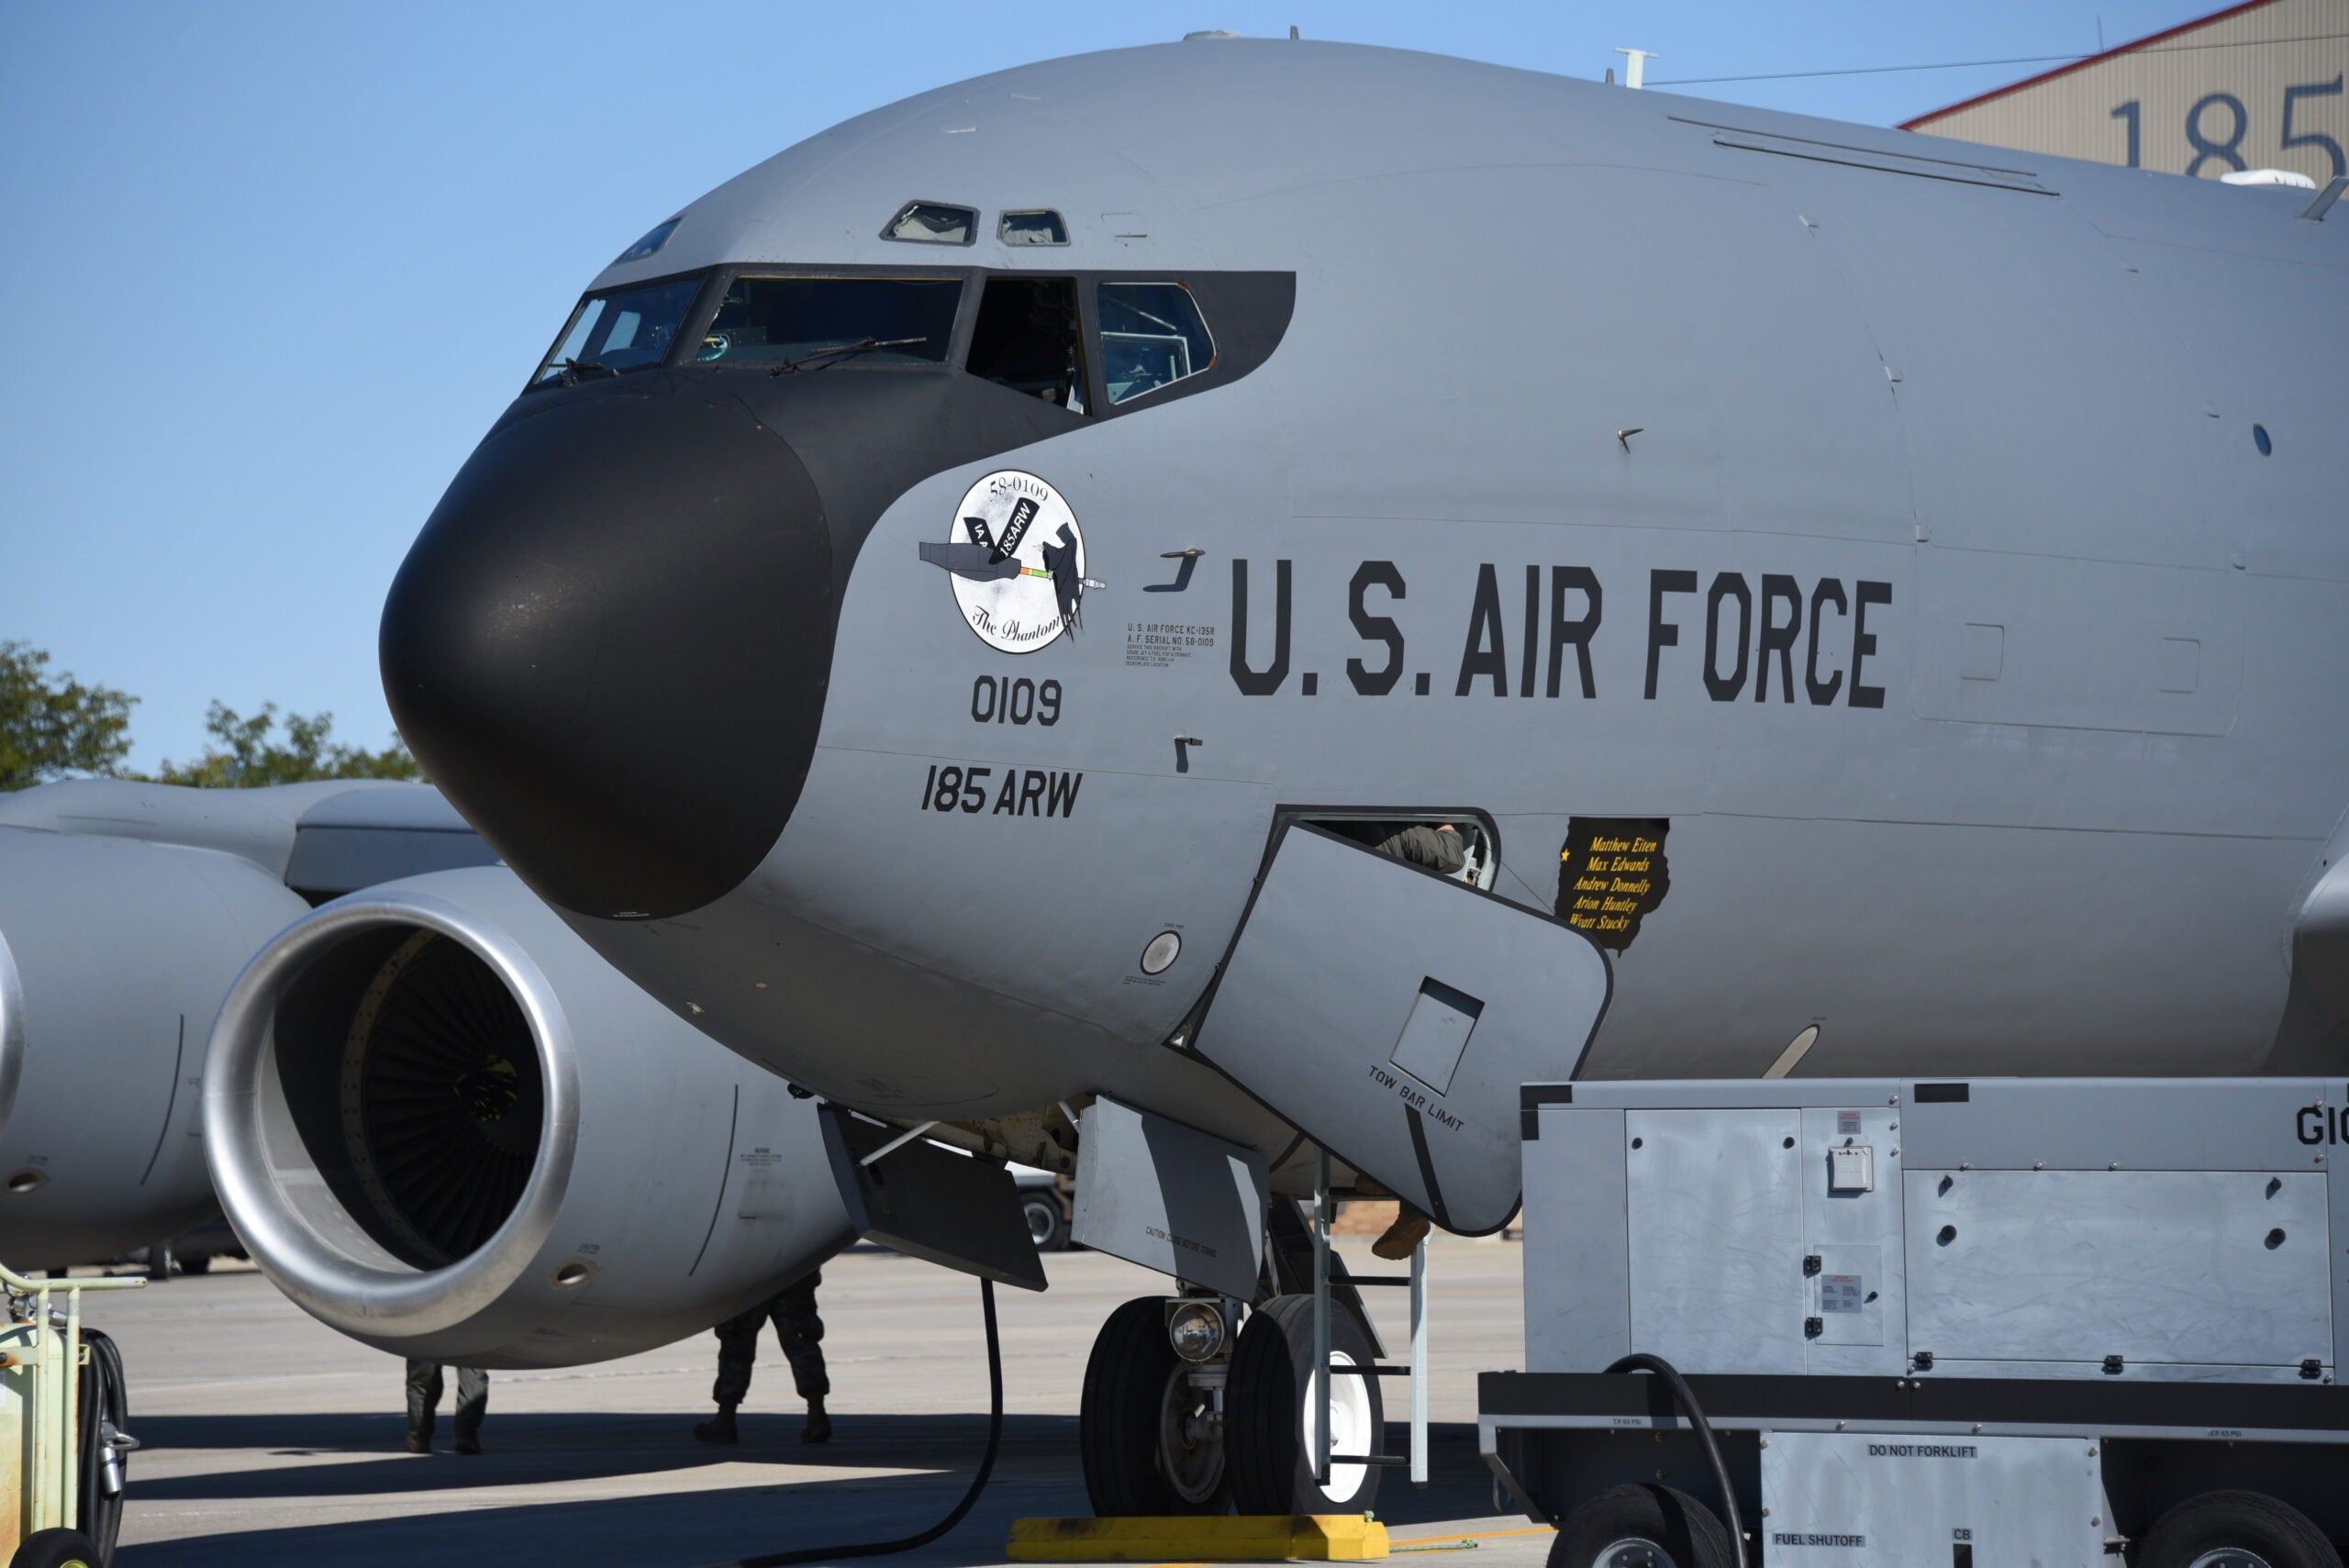 A U.S. Air Force KC-135 tail number 58-0109 with the nickname “Phantom 109” assigned to the Iowa Air National Guard is in front of the main hangar in Sioux City, Iowa on October 16, 2021. Crew Chiefs recently added nose art to the aircraft depicting a phantom riding along on the aircraft boom.

U.S. Air National Guard photo Senior Master Sgt. Vincent De Groot